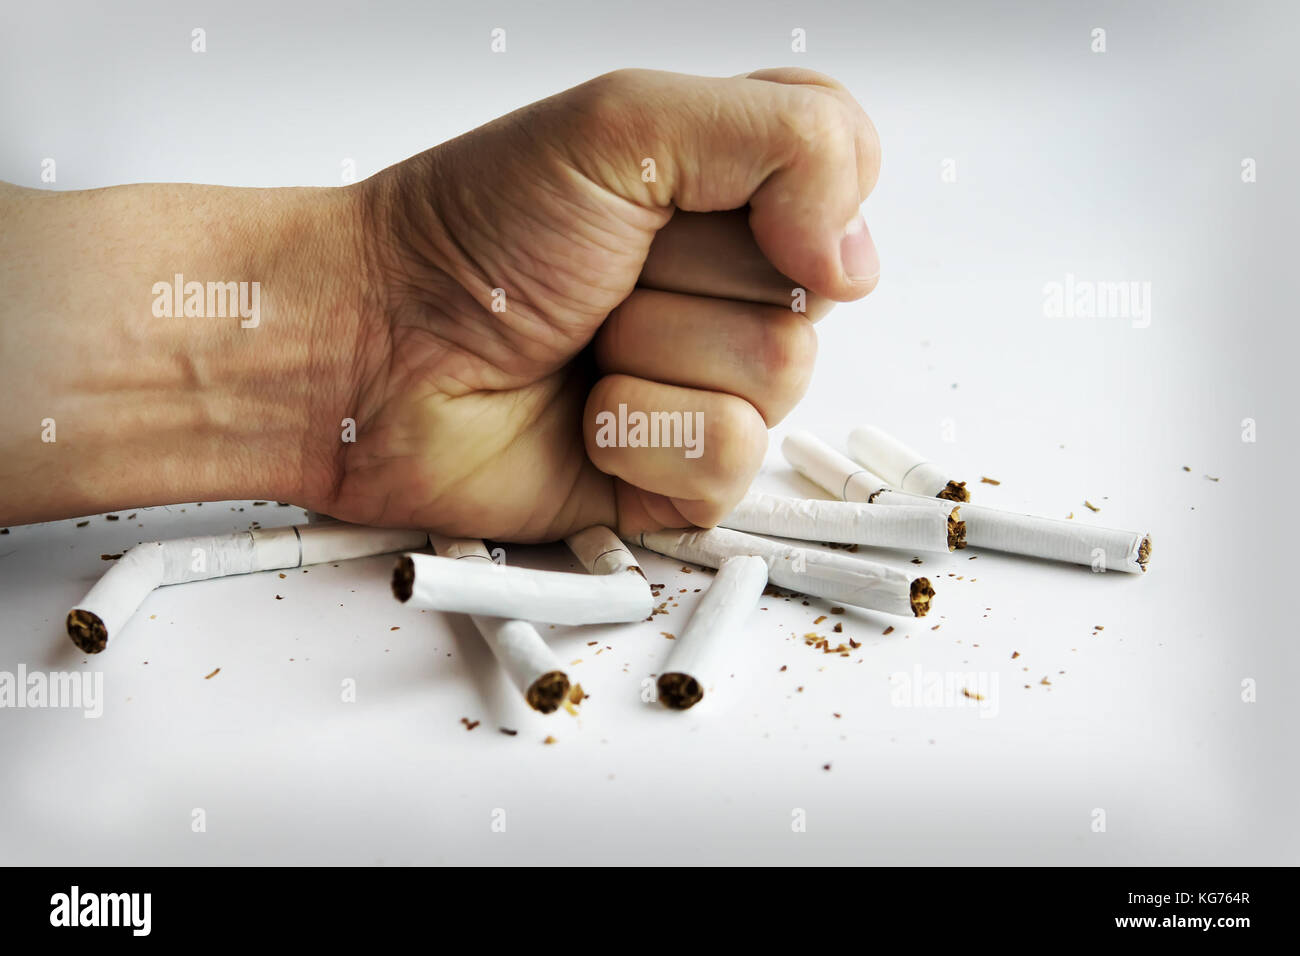 a fist smashes the cigarette. Man's fist crushing cigarettes isolated on white background. Stock Photo